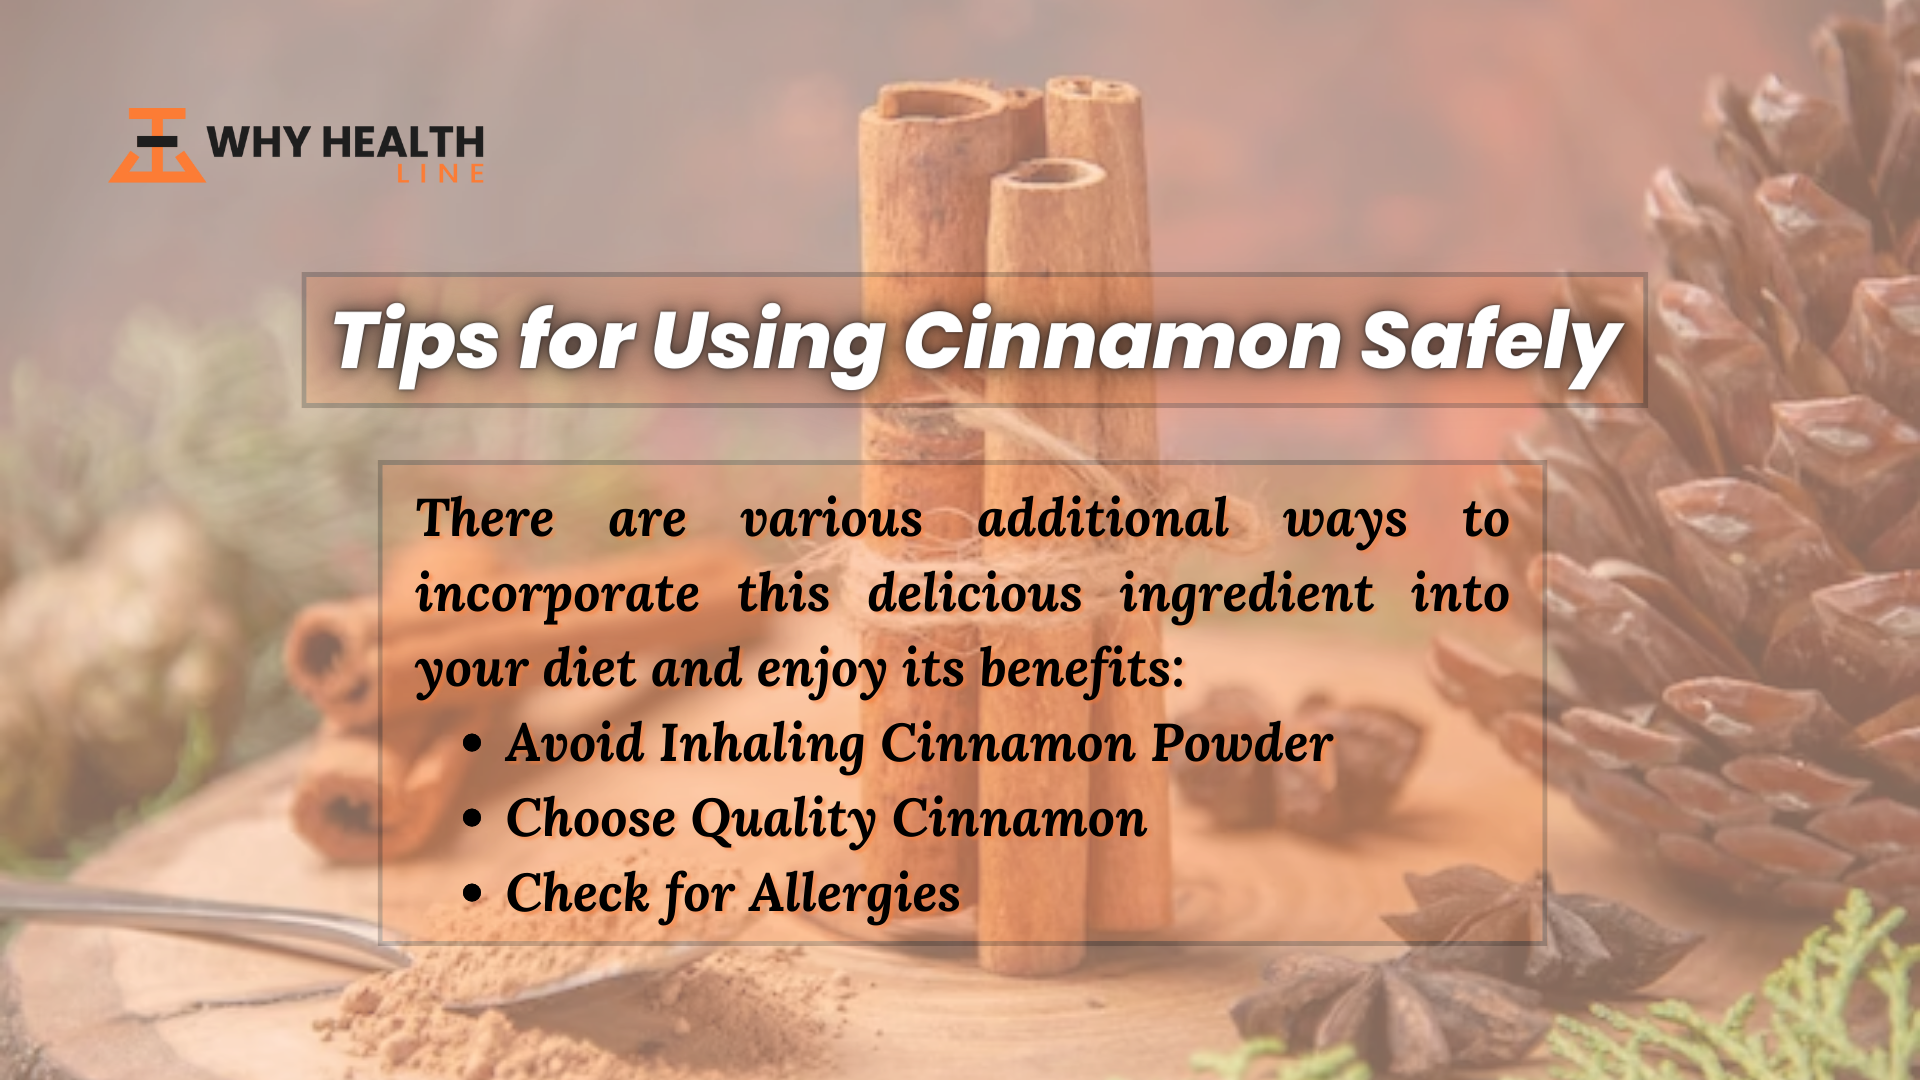 Tips for Using Cinnamon Safely